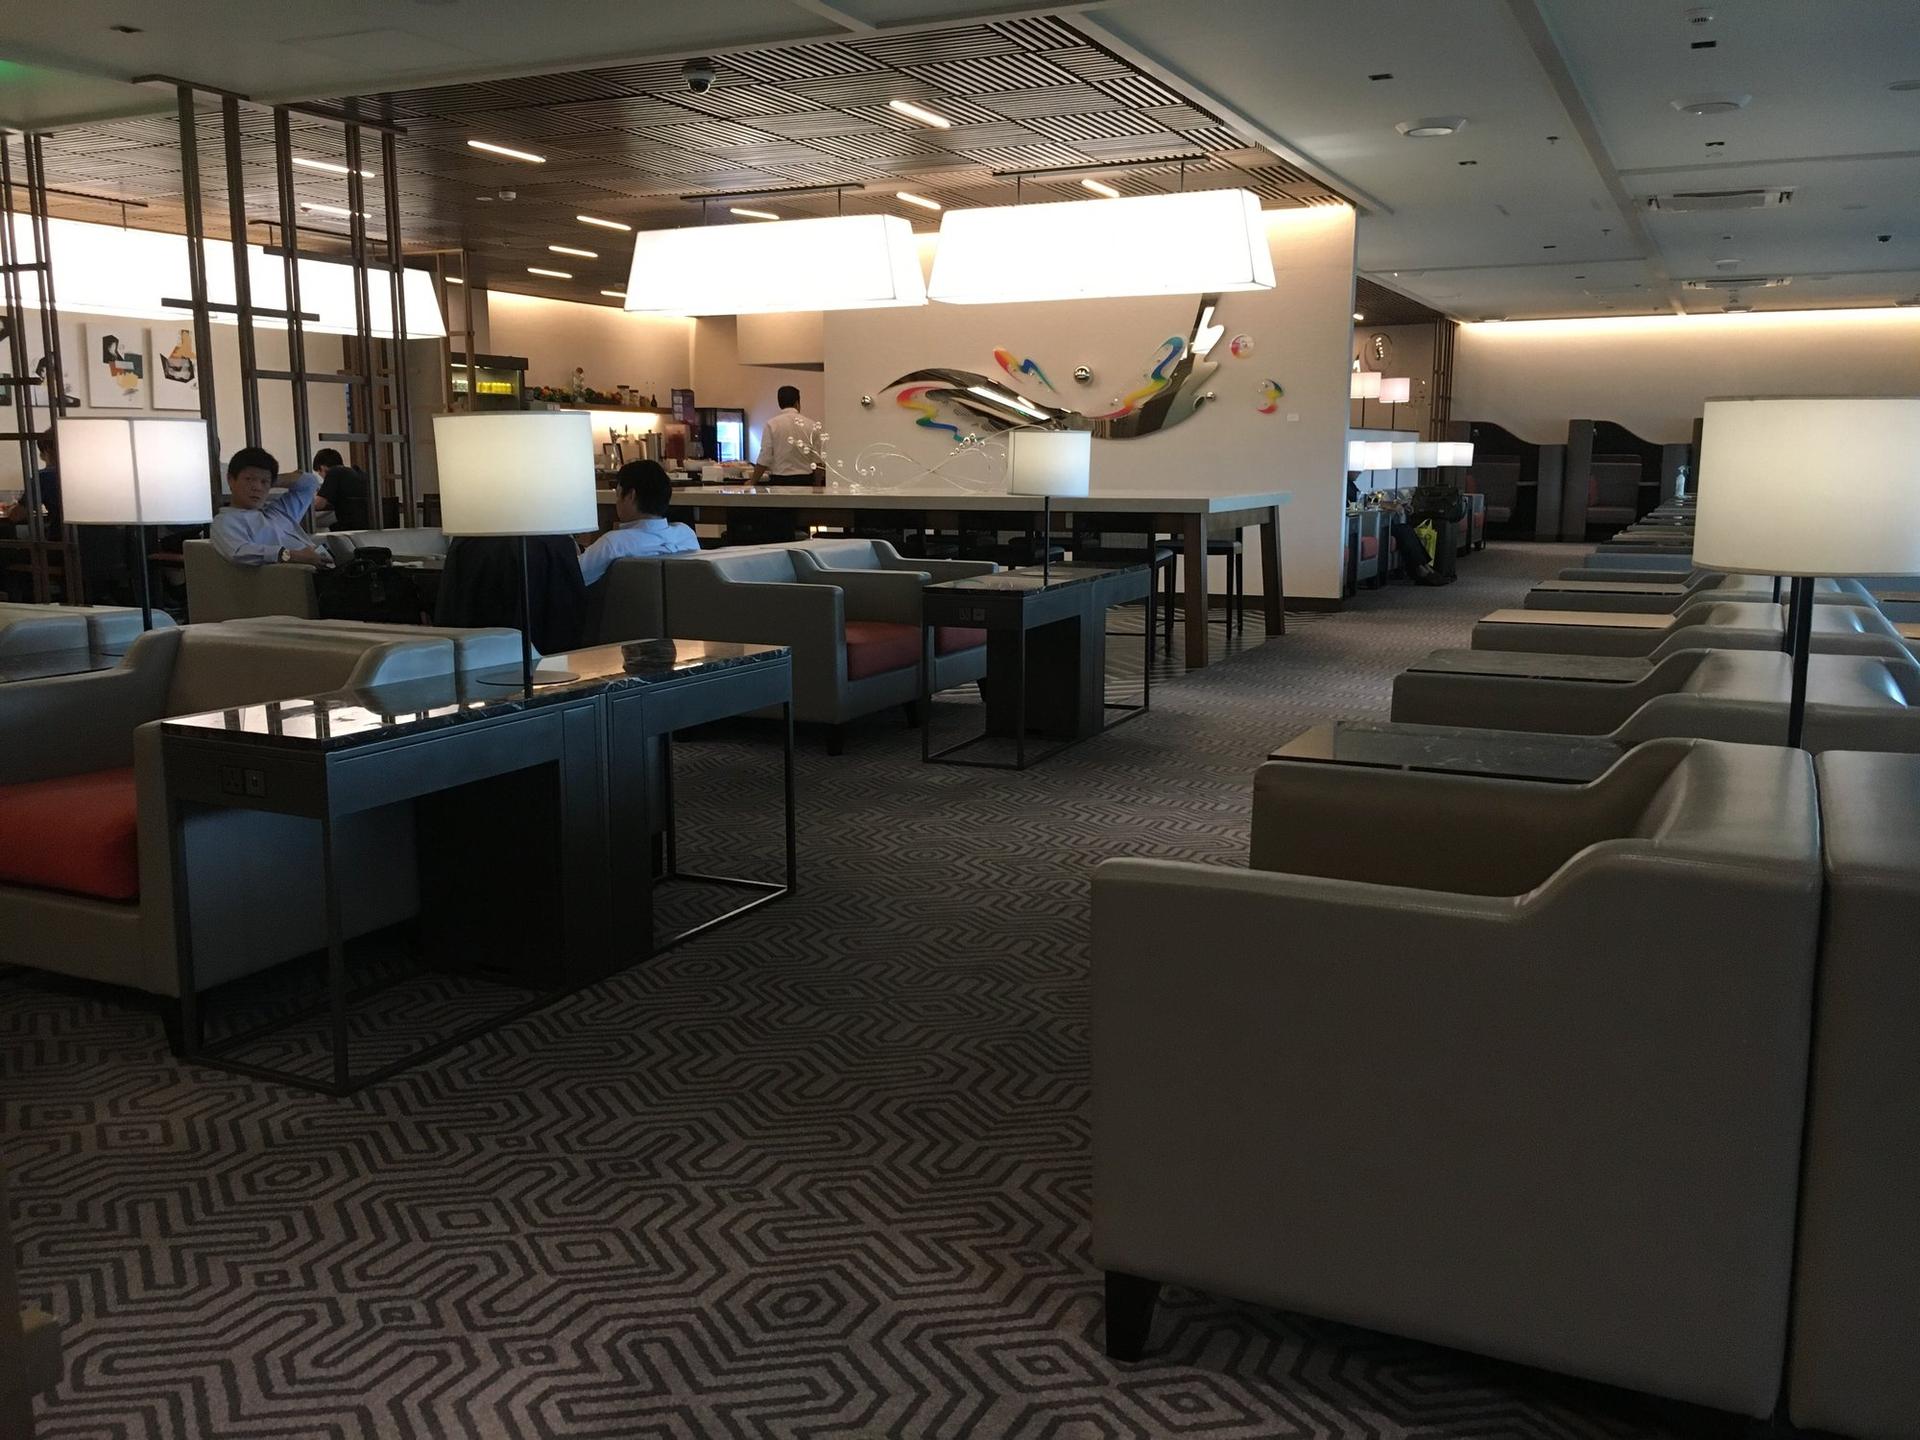 Singapore Airlines SilverKris Lounge image 11 of 12